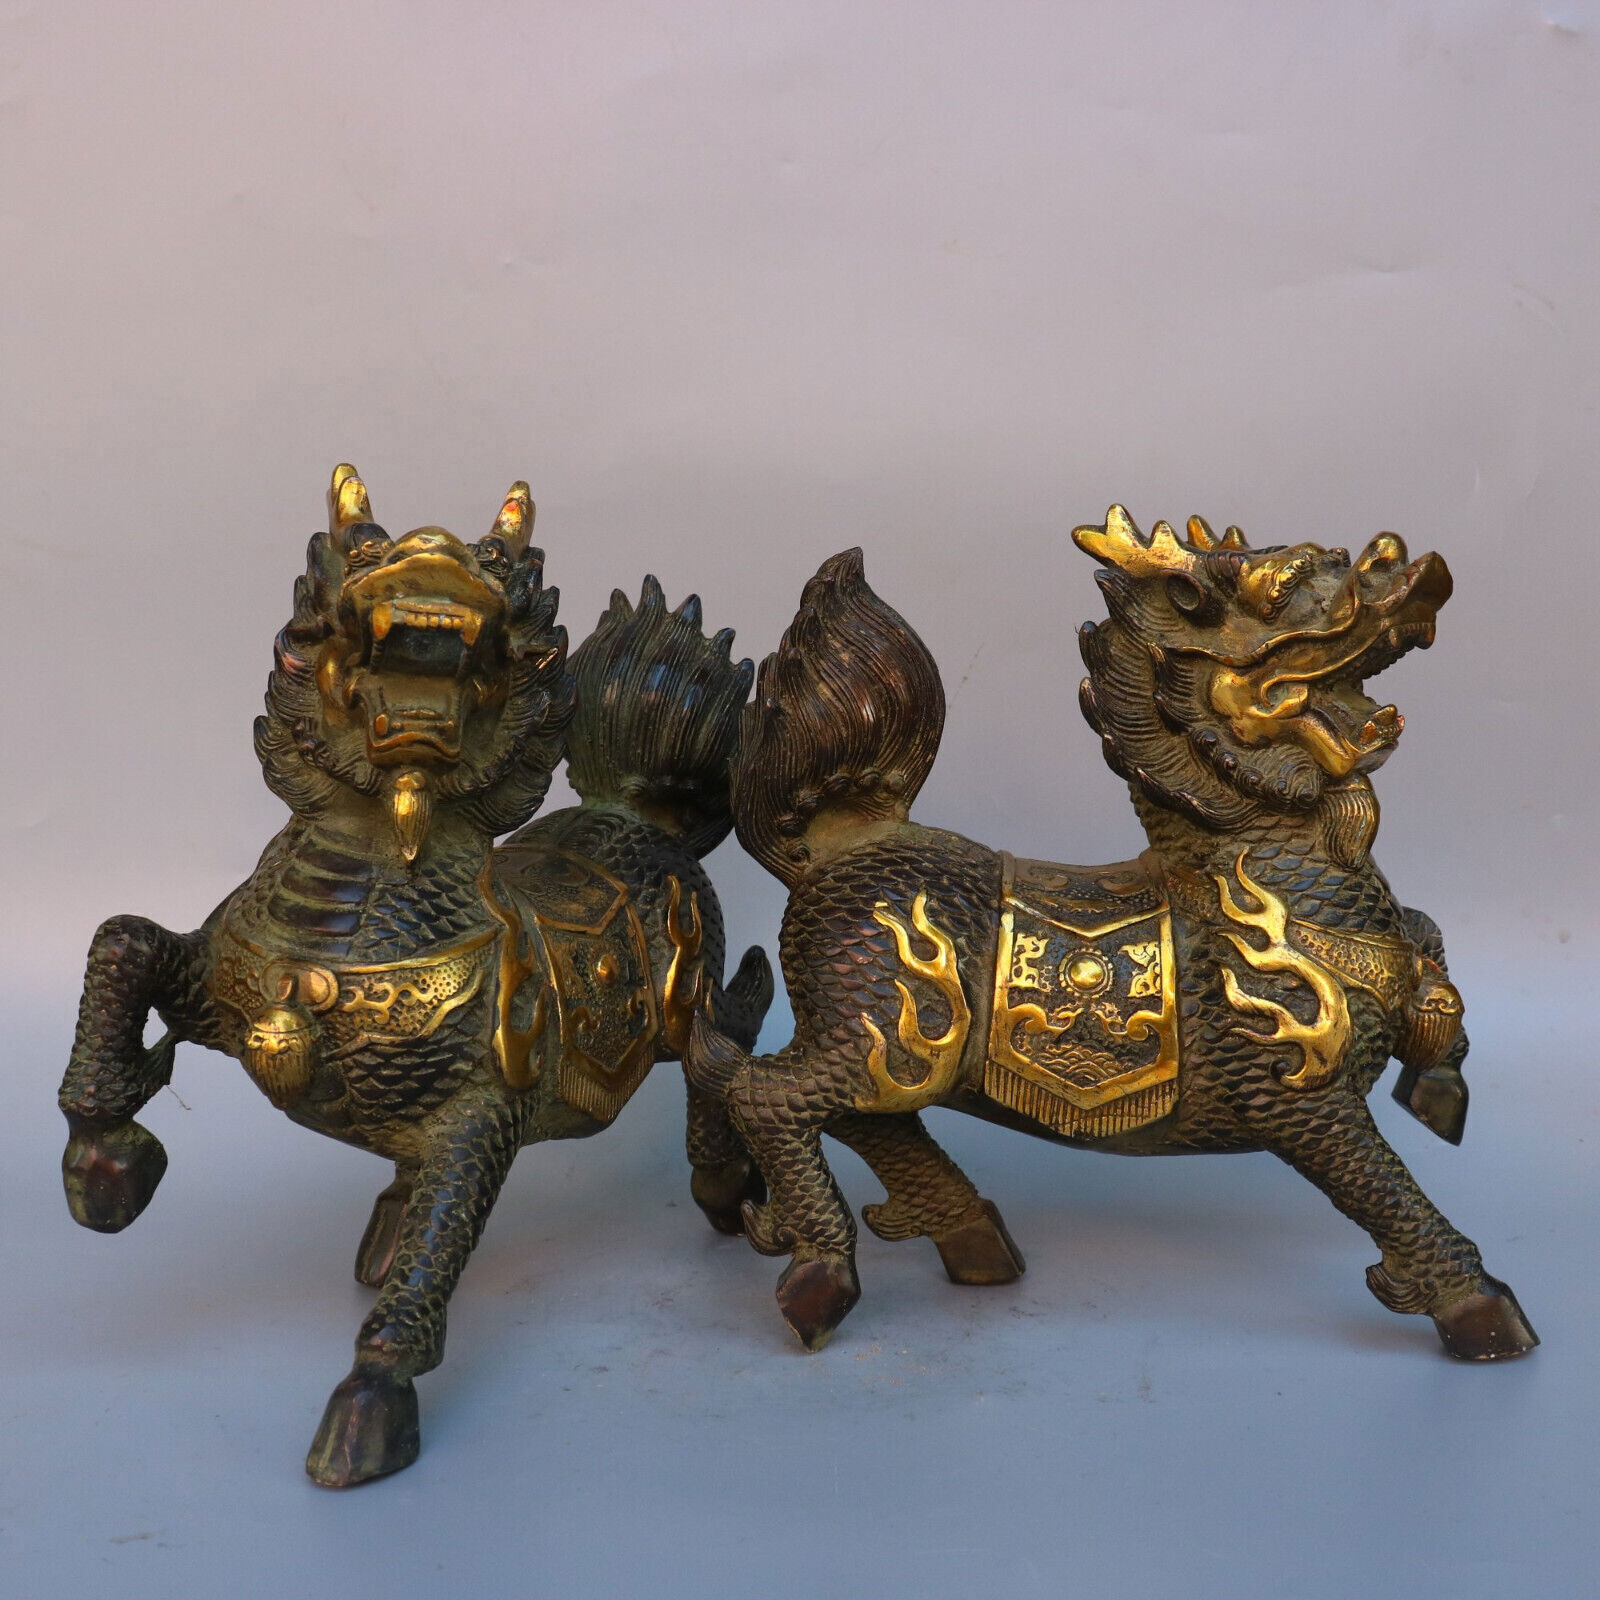 24cm fengshui old copper bronze carved pair qilin kylin lucky gilt big statue